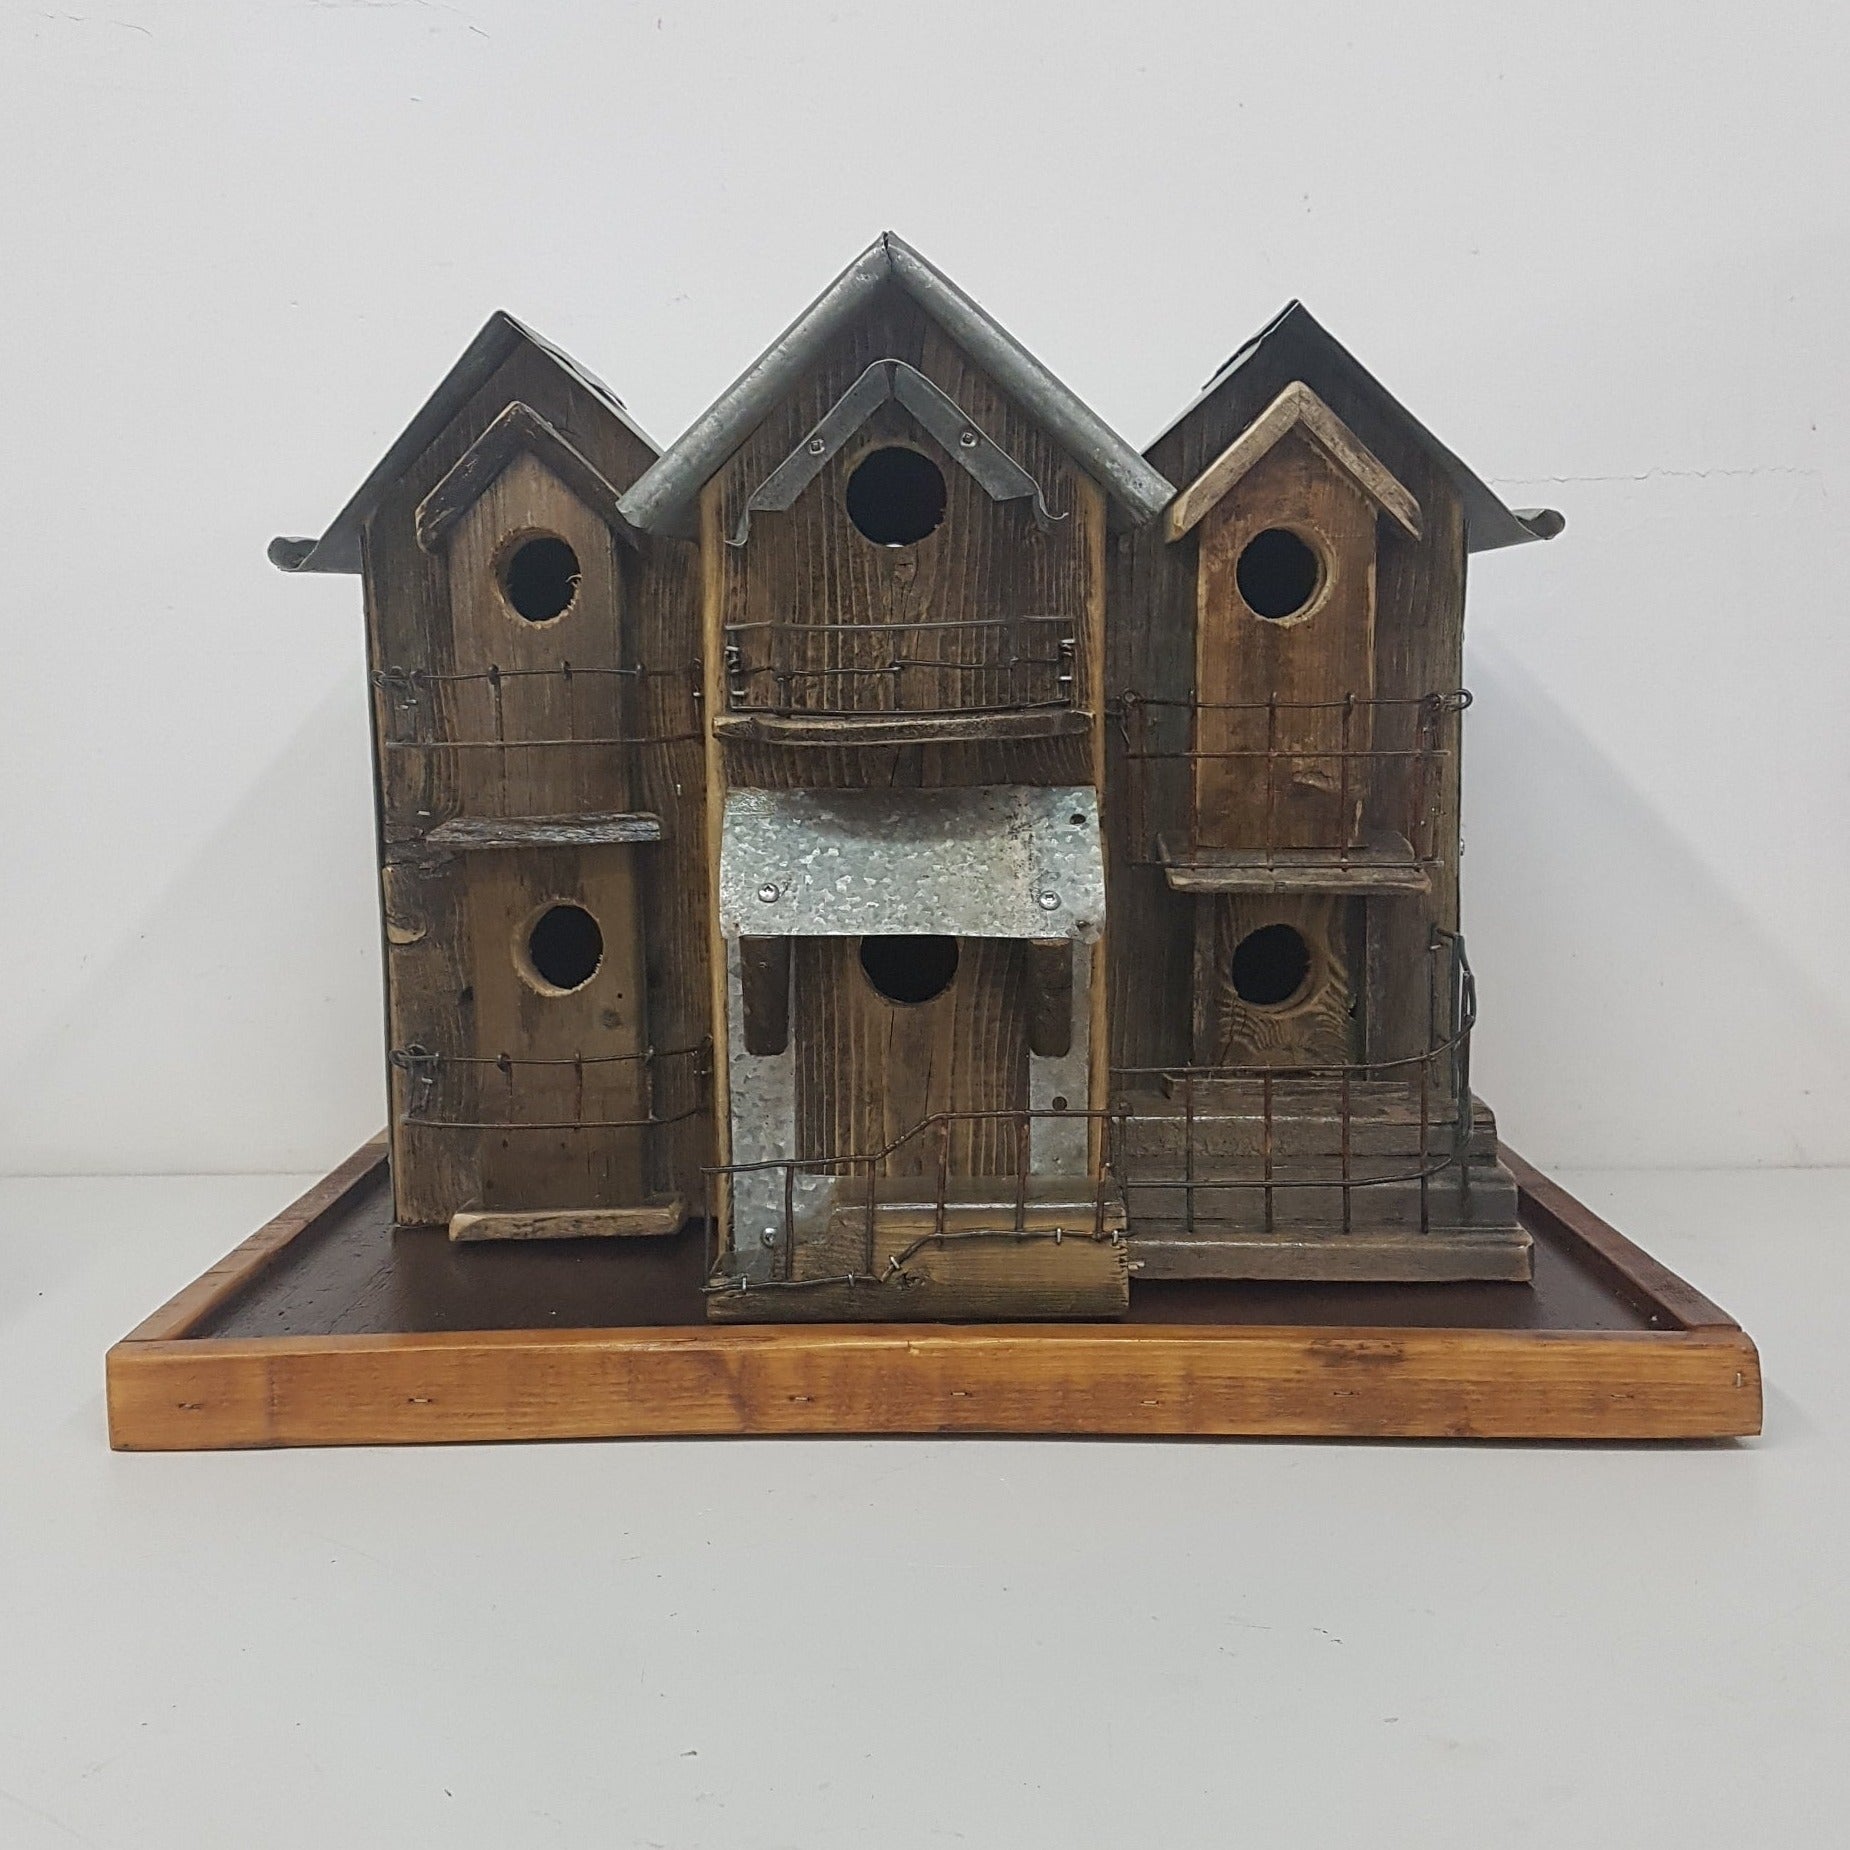 Rustic Bird House hand built with a Tin Roof - Wainfleet Trading Post